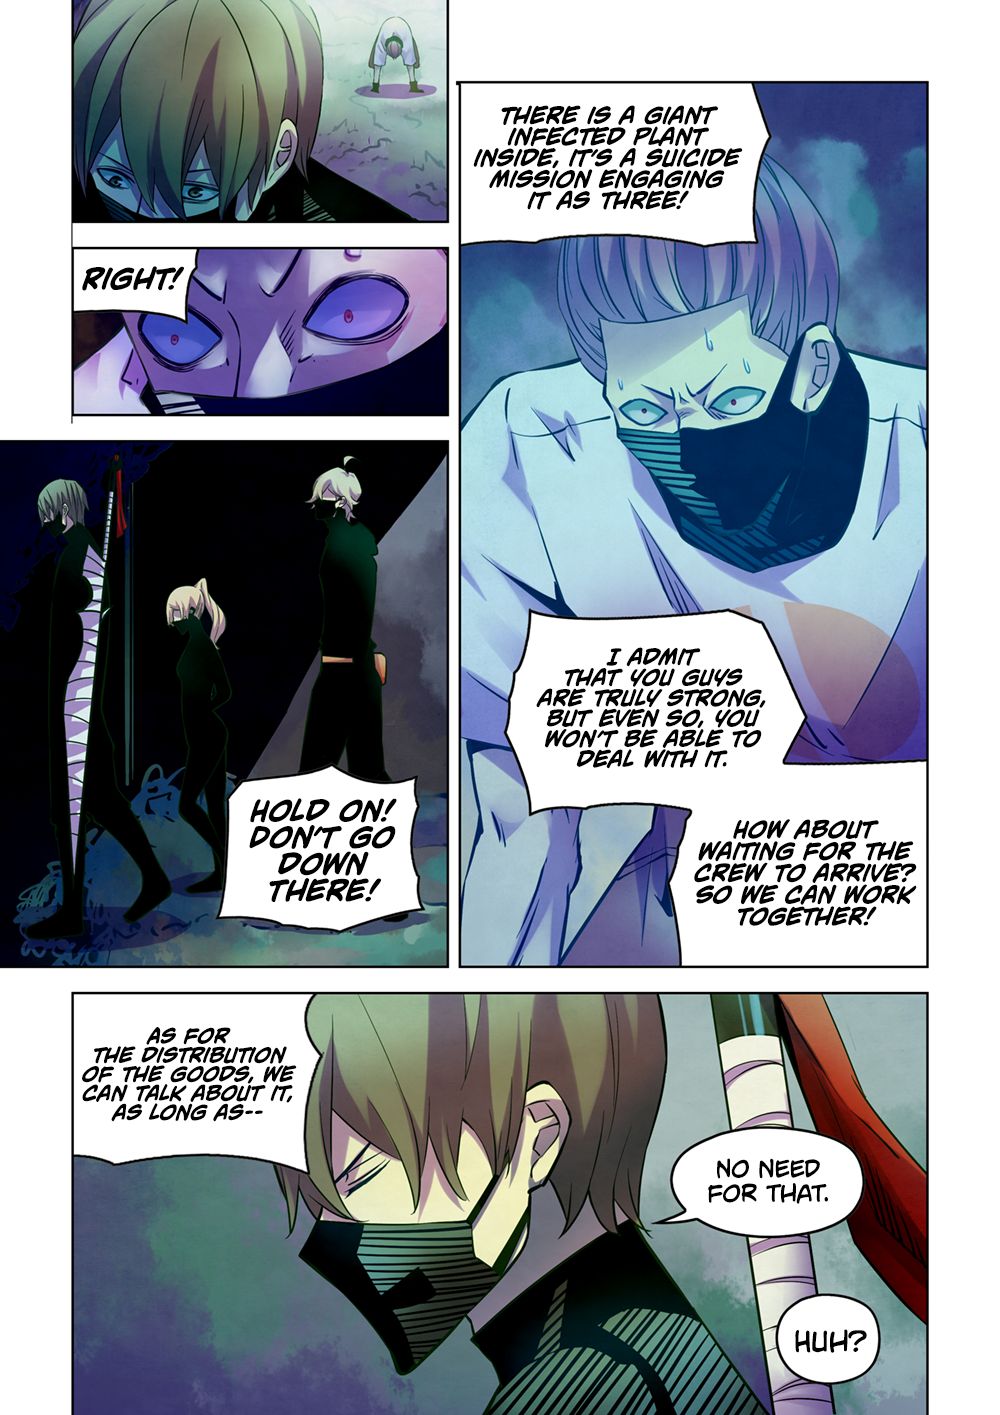 The Last Human Chapter 206 Page 1